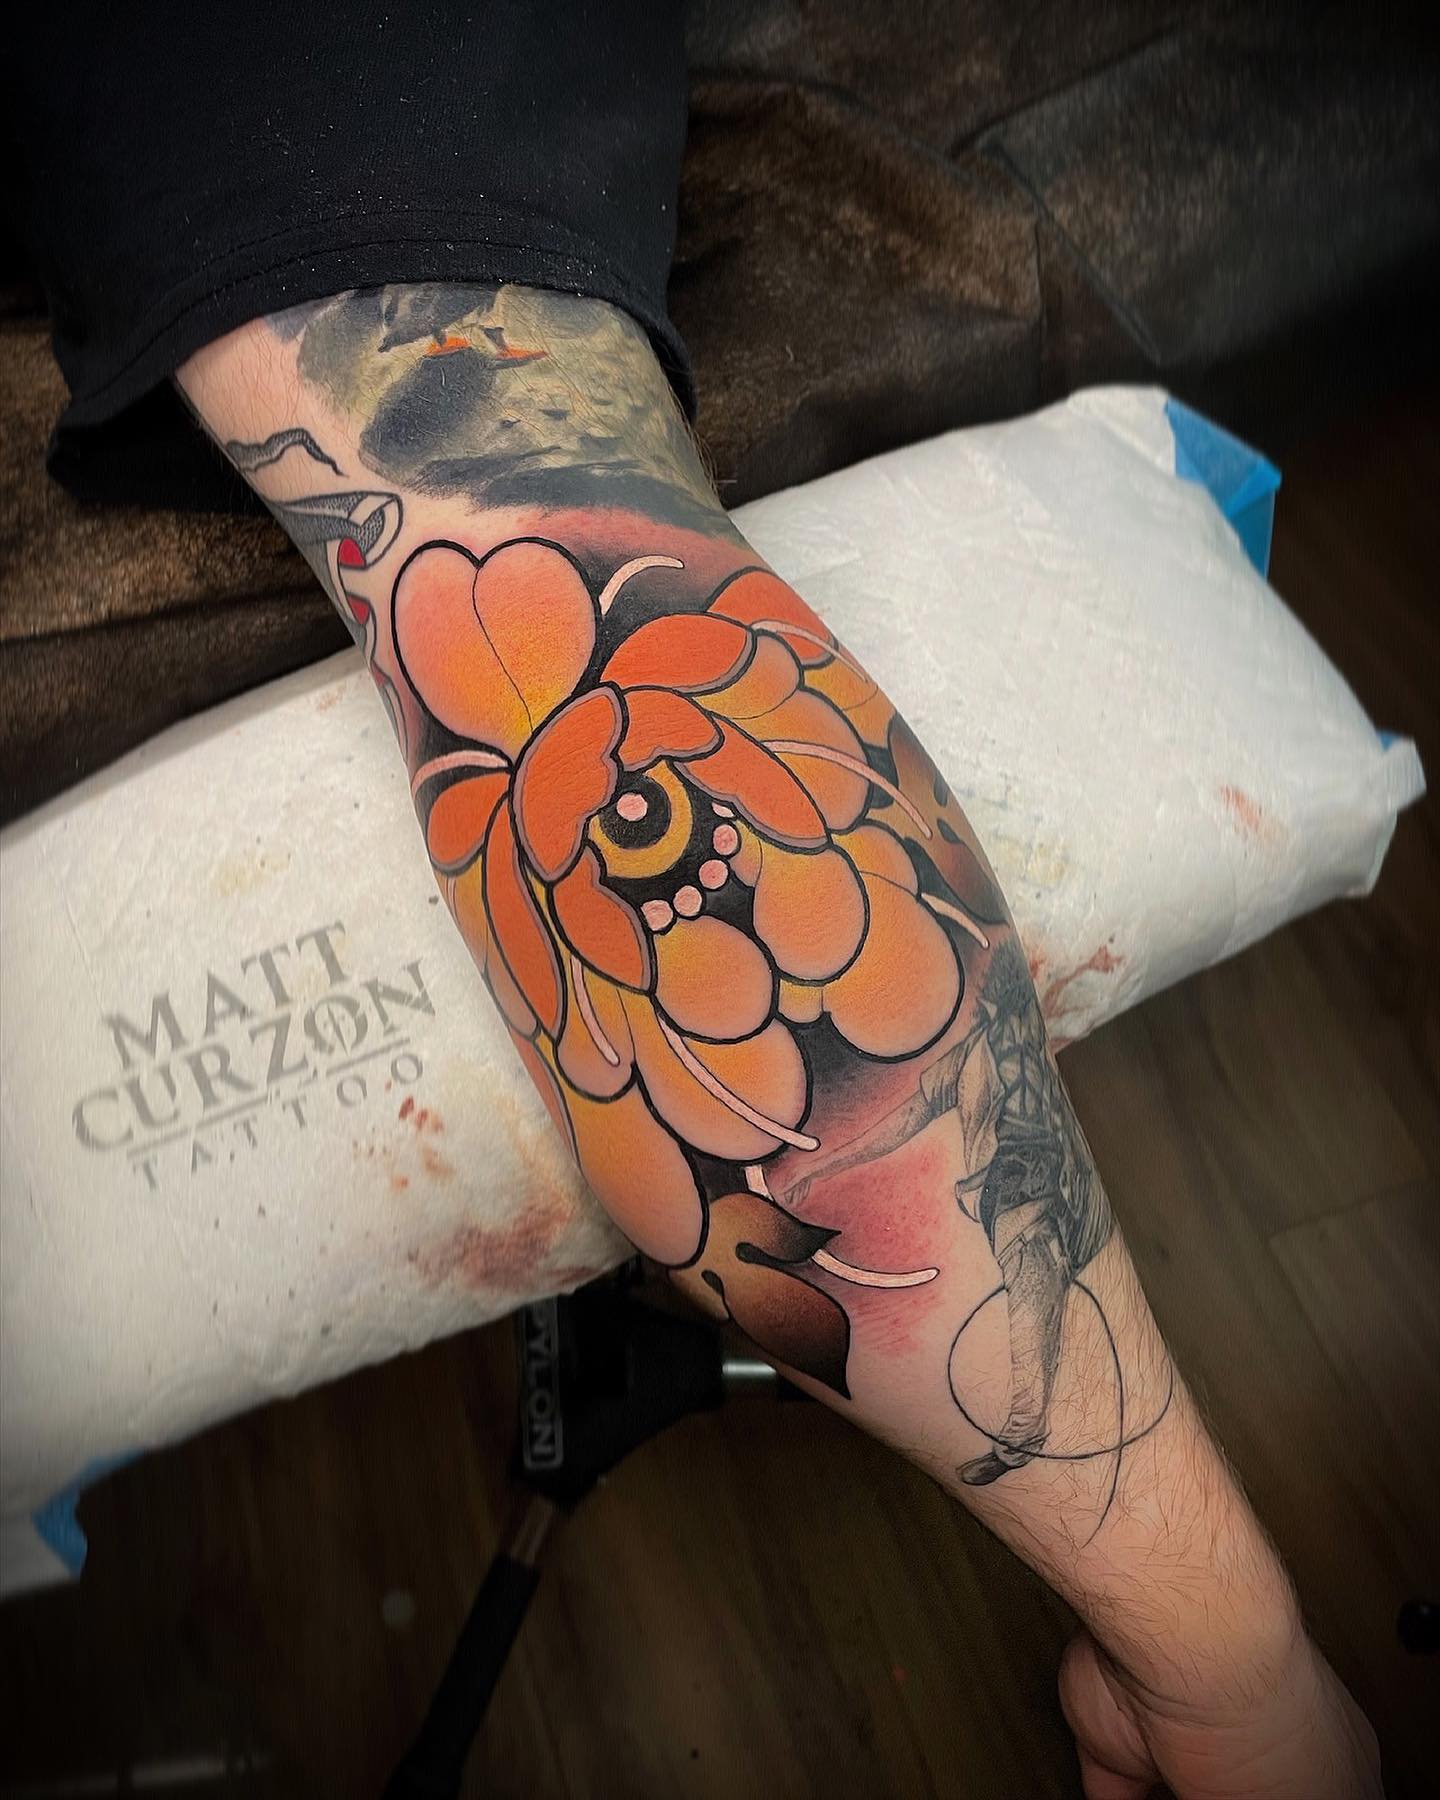 This is a bright flower tattoo that one can interpret however they like. You may be someone who likes loud colors, and on the other end, you may be someone who prefers to have feminine designs. In the end, it all comes down to your outlook on life.